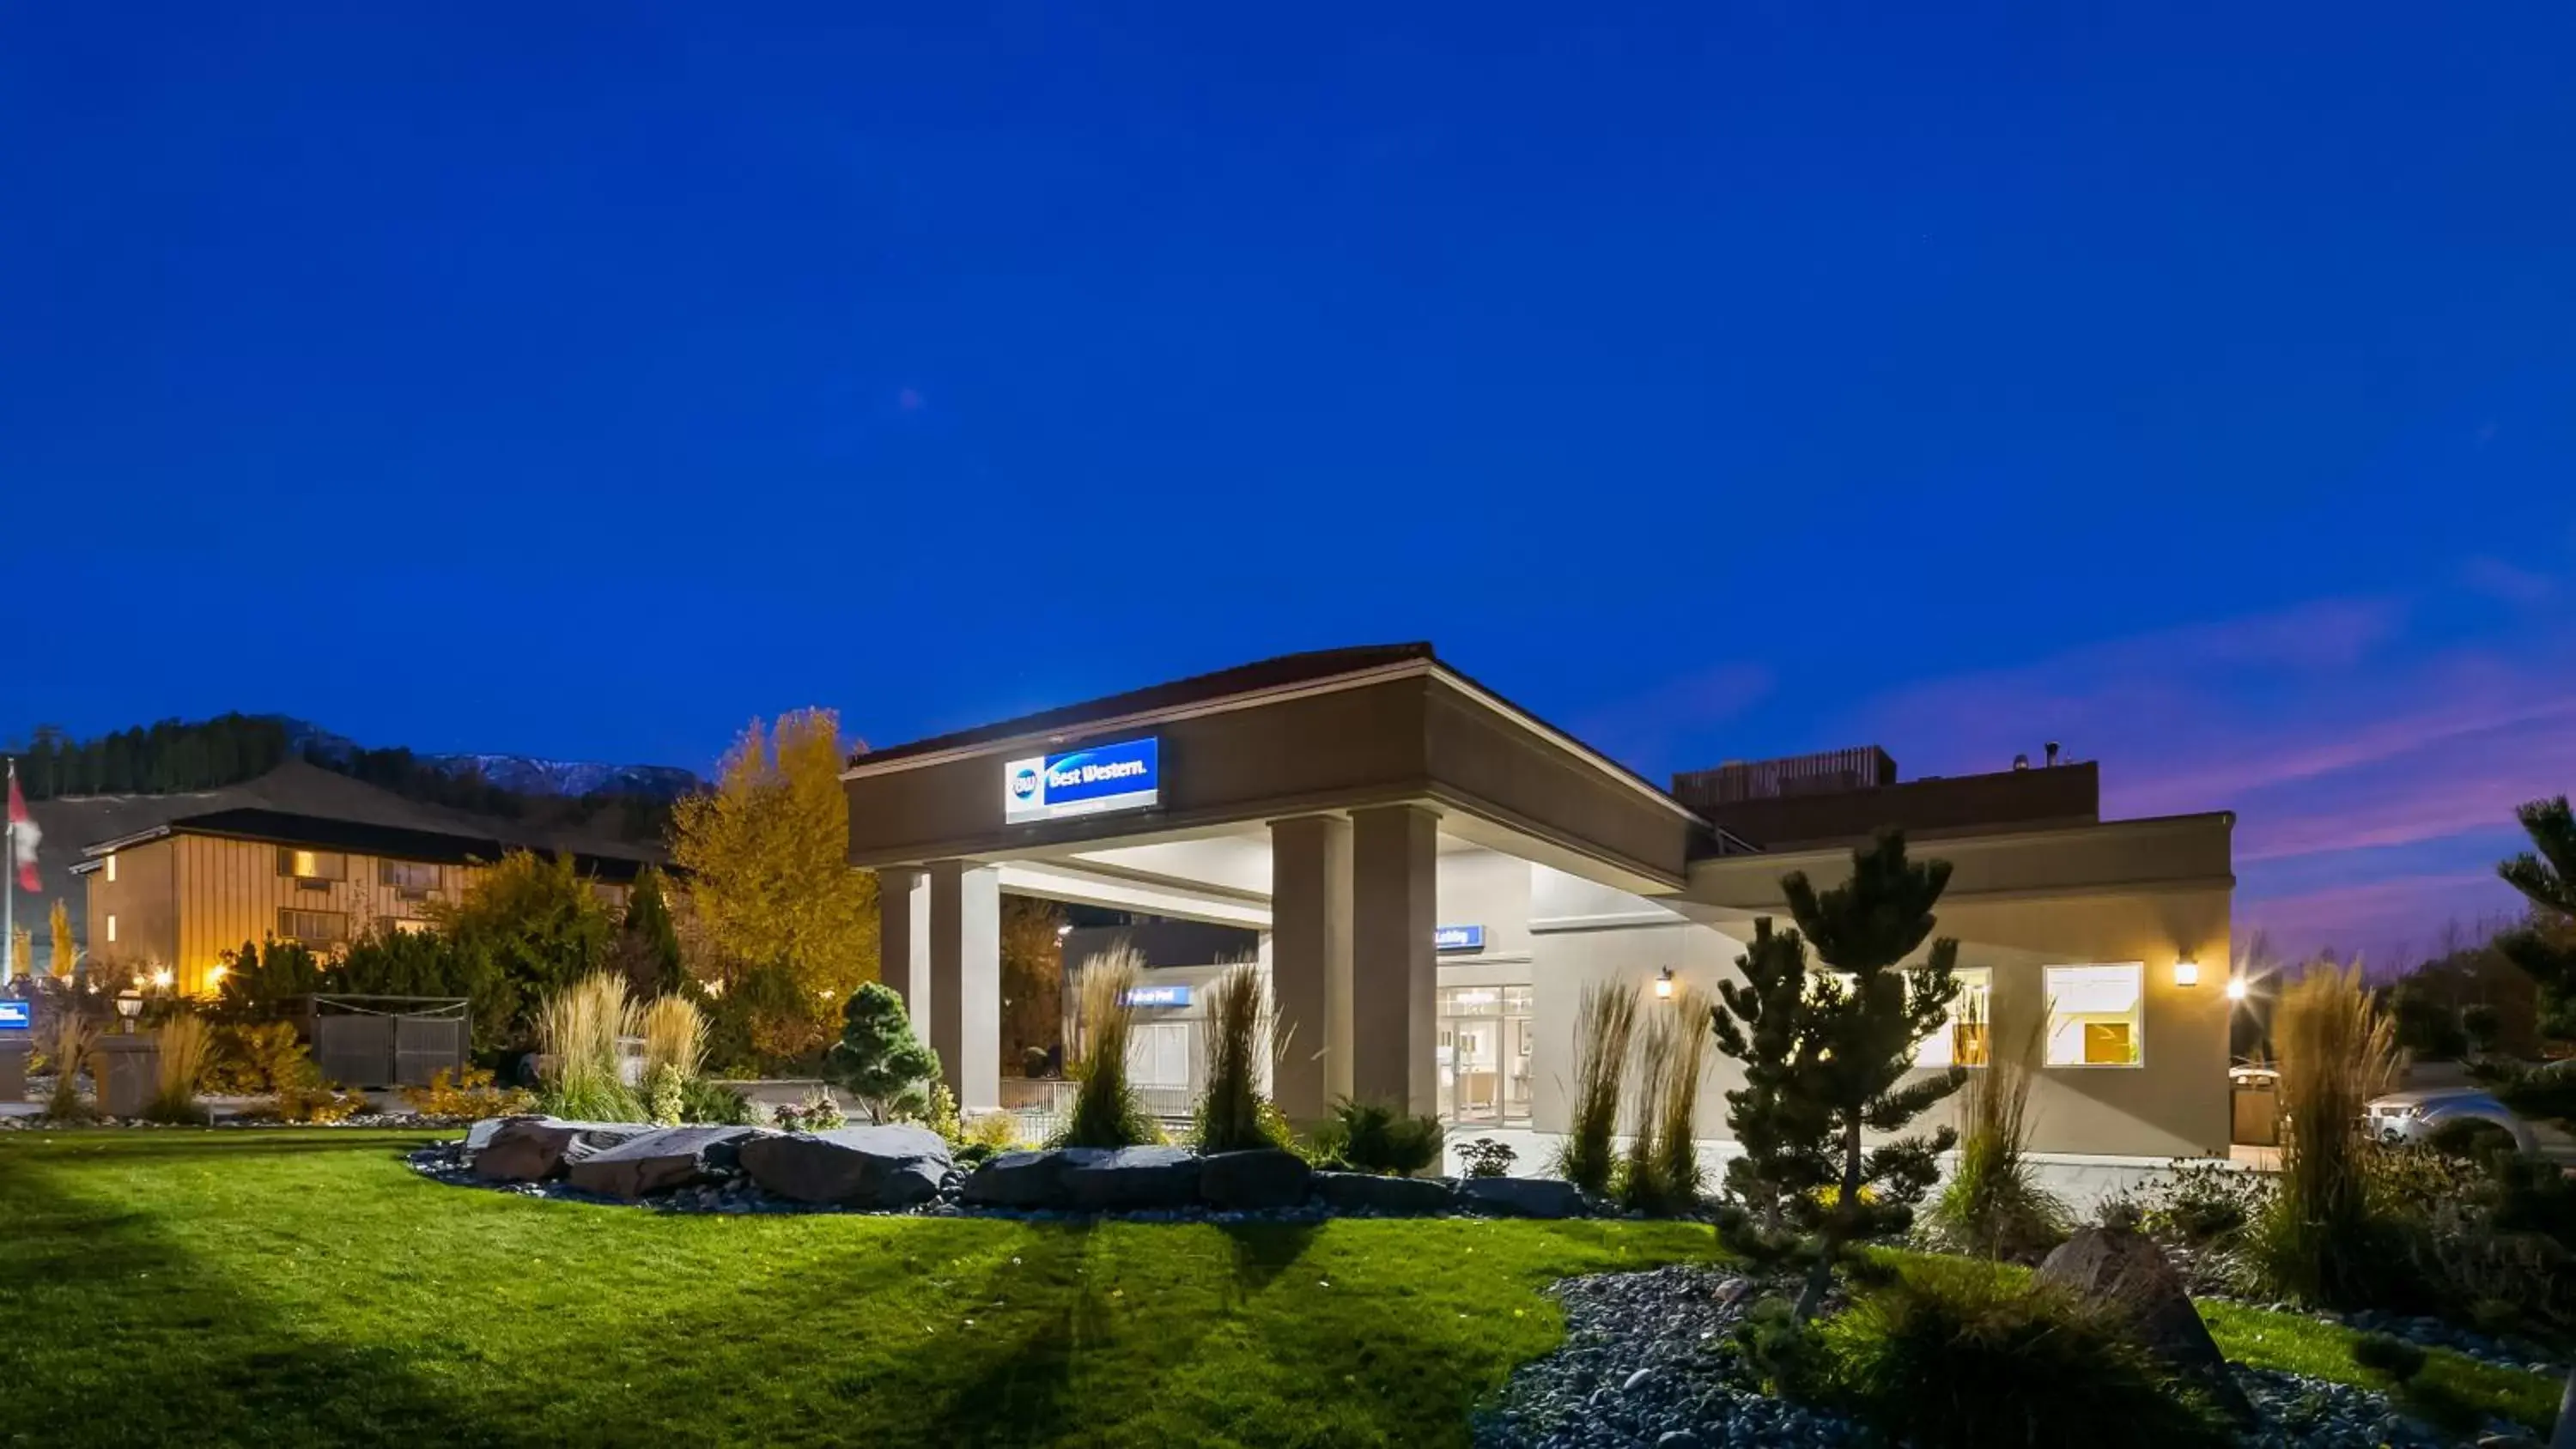 Property Building in Best Western Mountainview Inn